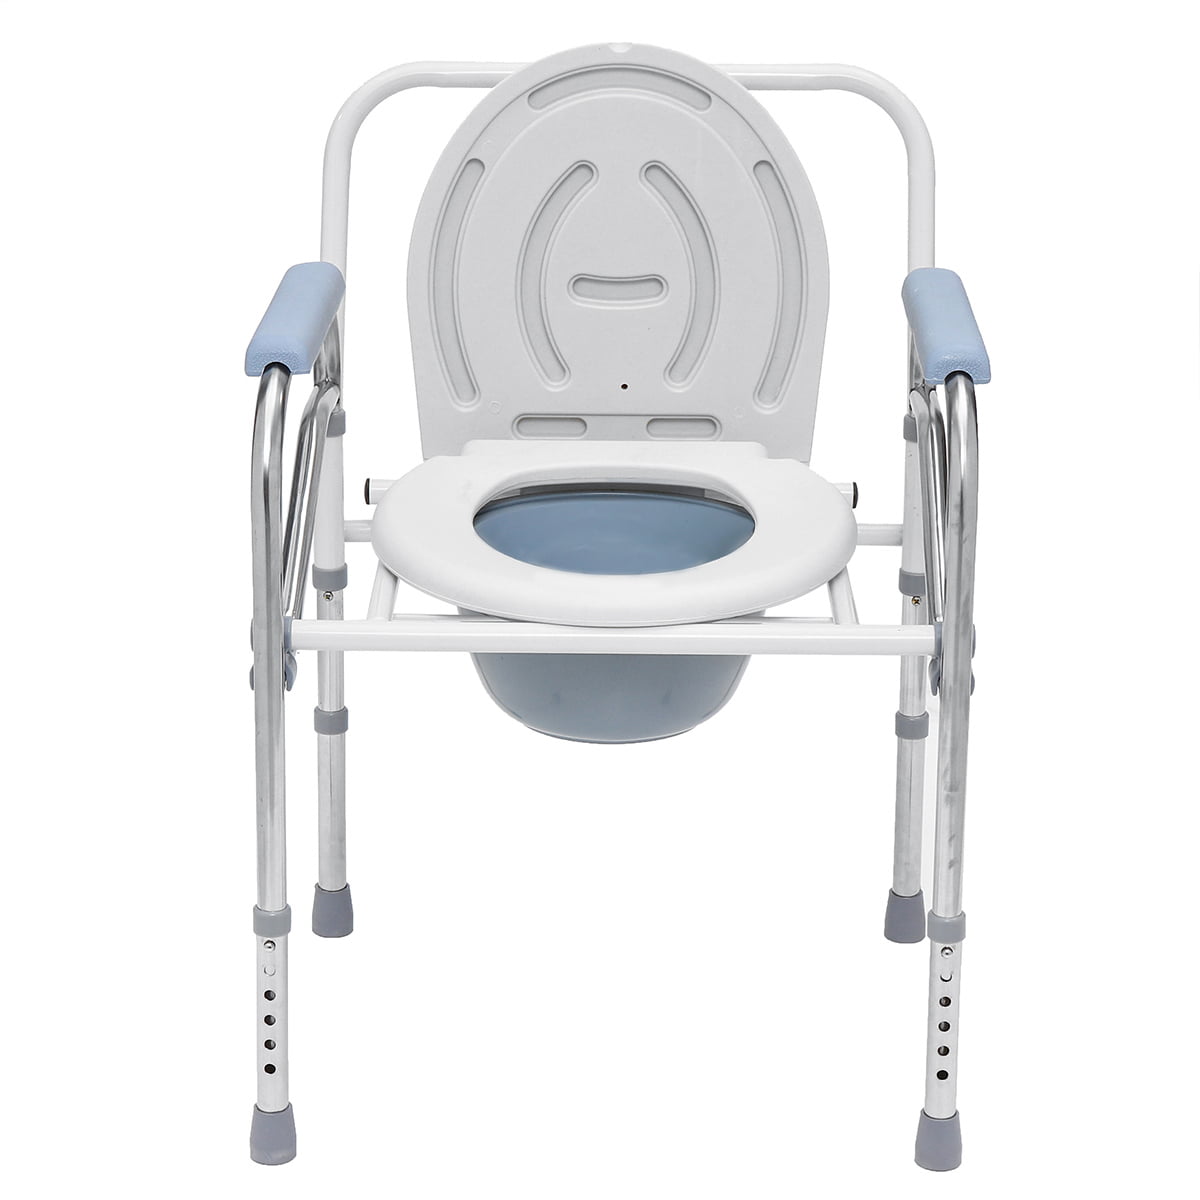 Medical Toilet Chair Toilet Bedside Commodes, Adult Potty Chair